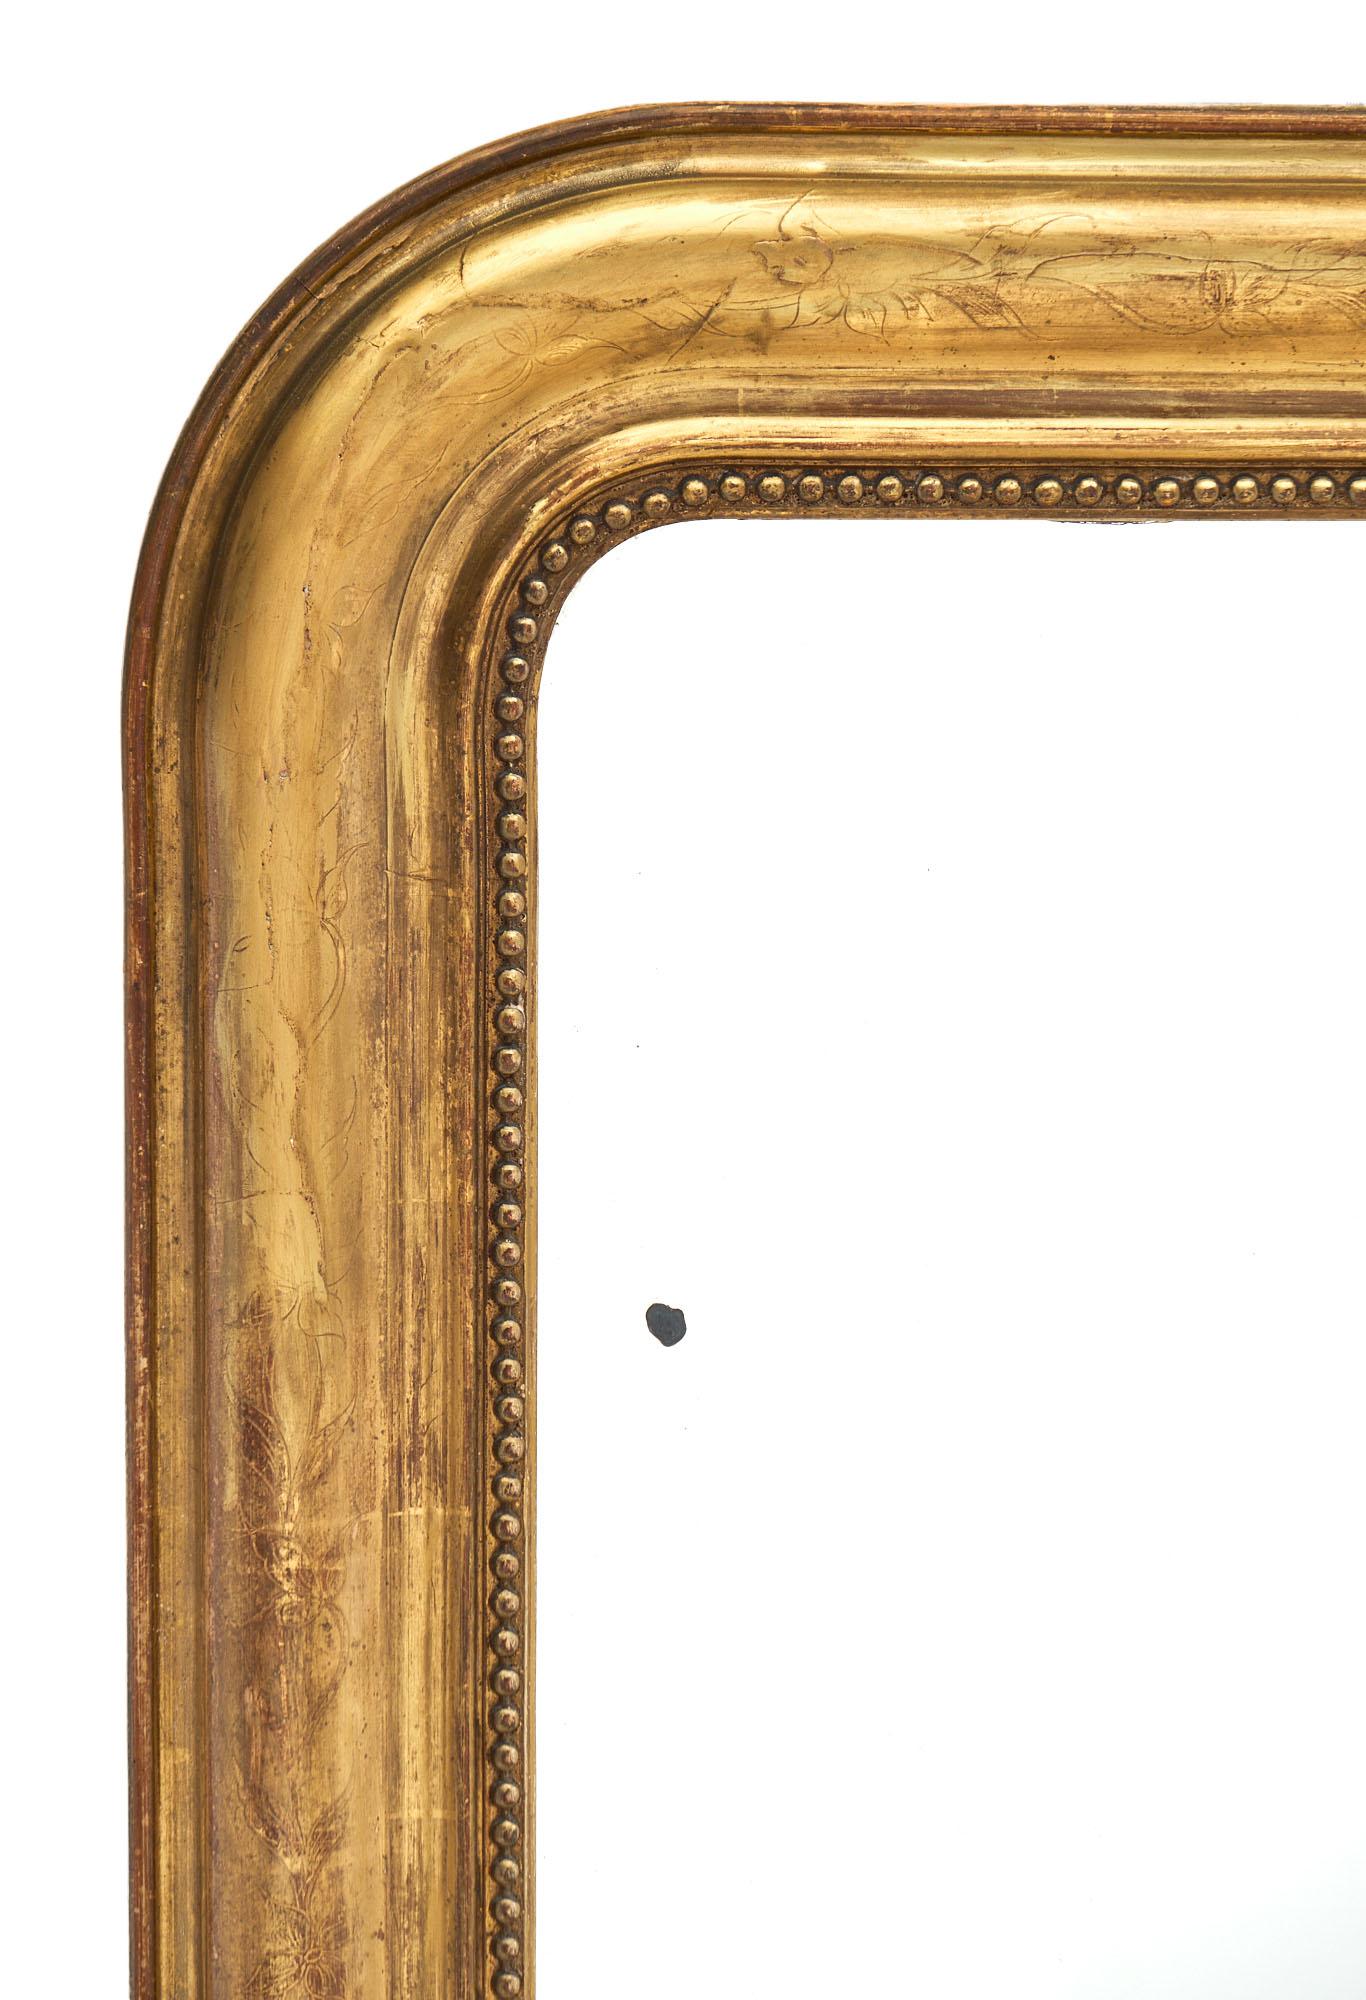 Antique Louis Philippe period French mirror with gold leafed frame, hand engraved floral details, and original mirror.